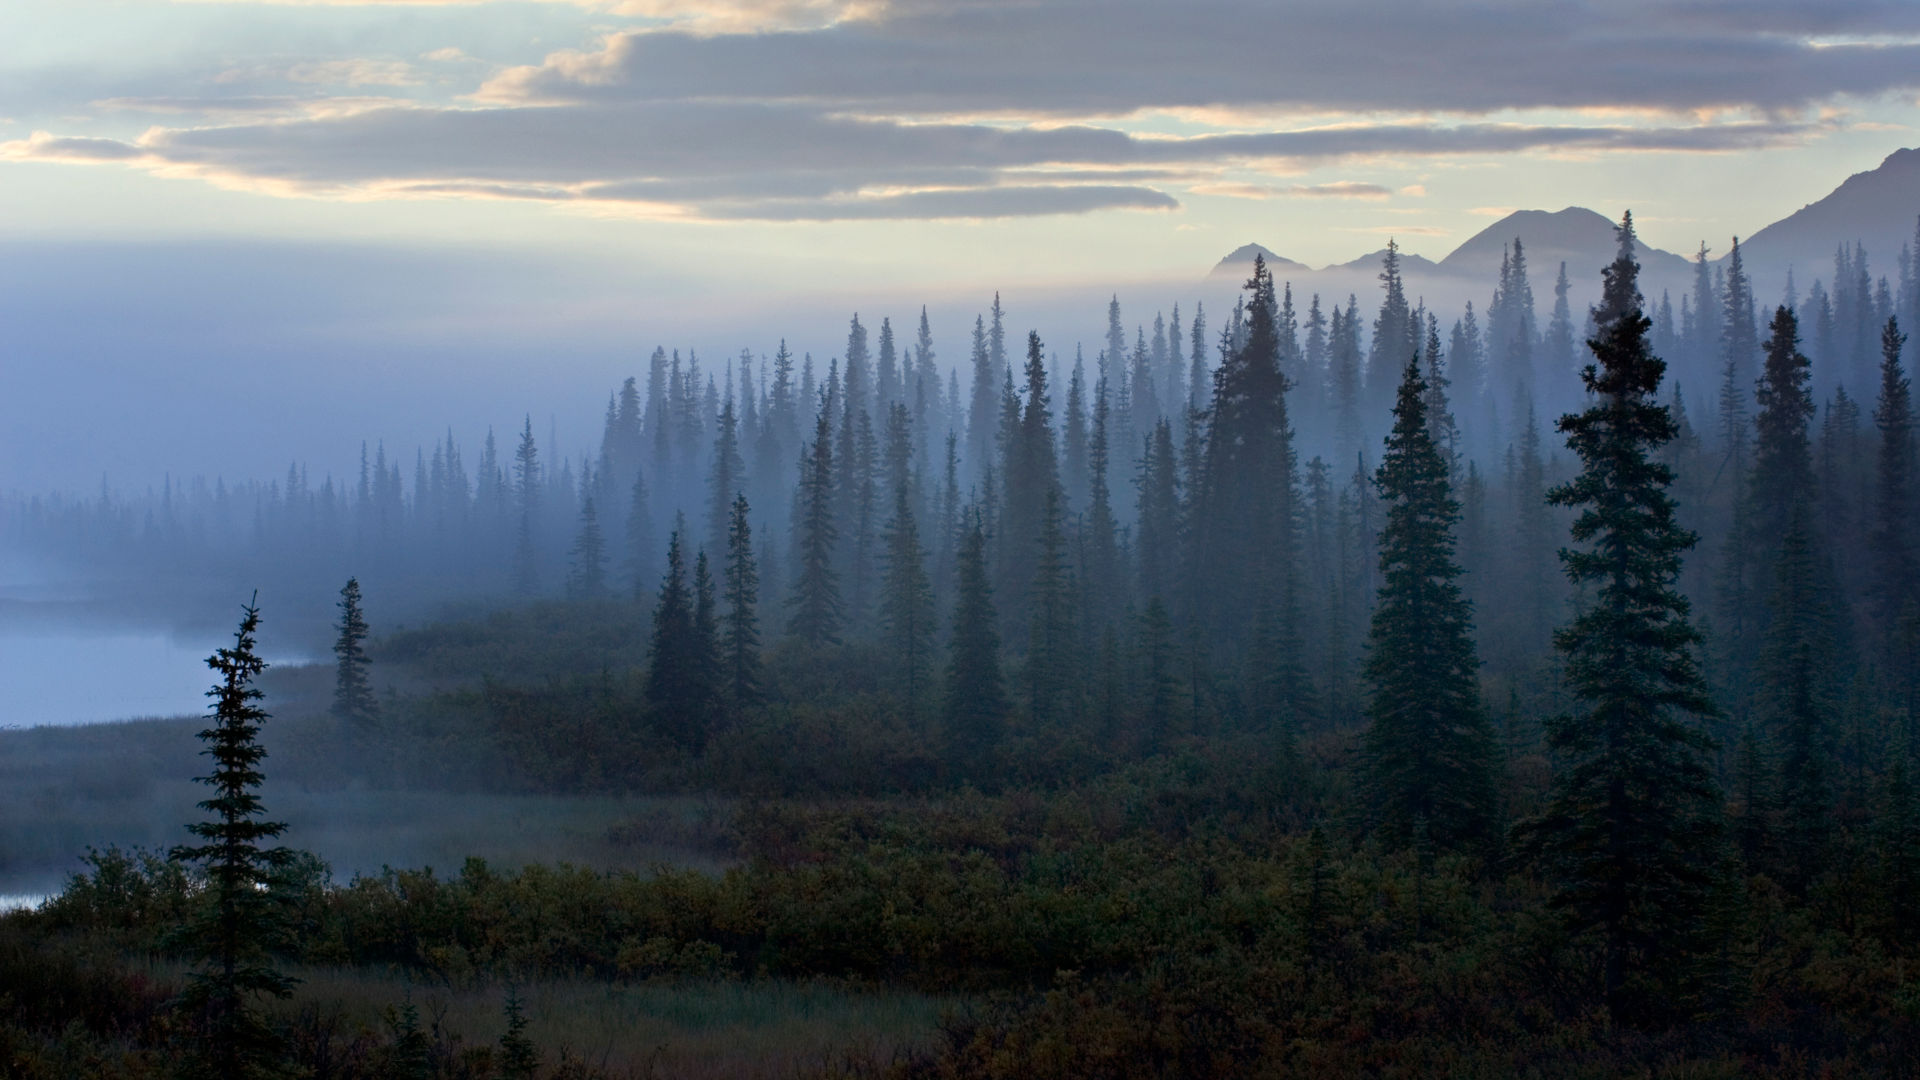 A boreal forest in Alaska.